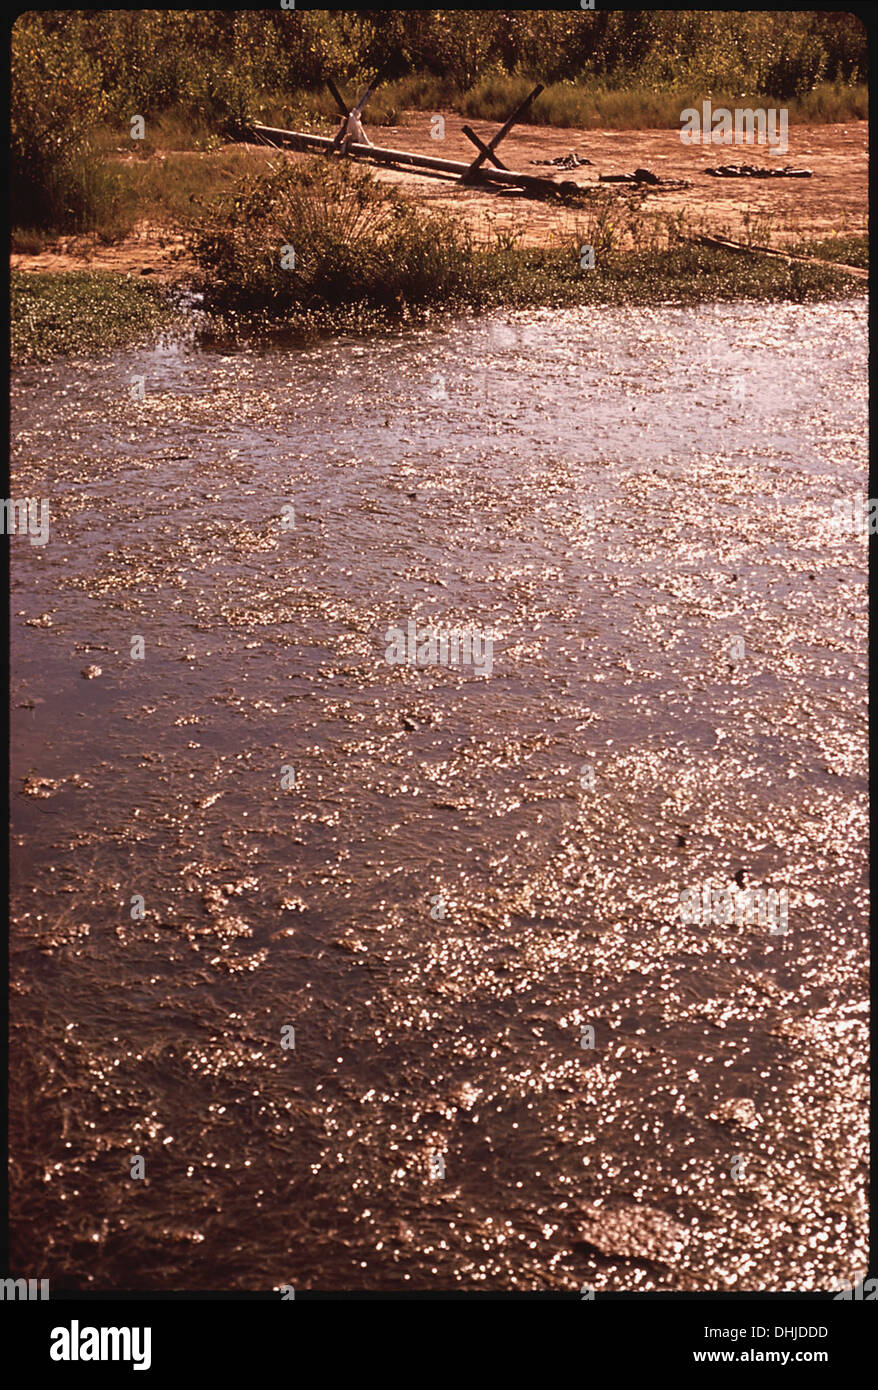 DISCHARGE PIPE FROM GAS WELL IN MARSH EMPTIES INTO POND. POND WATER IS COVERED WITH SCUM 253 Stock Photo